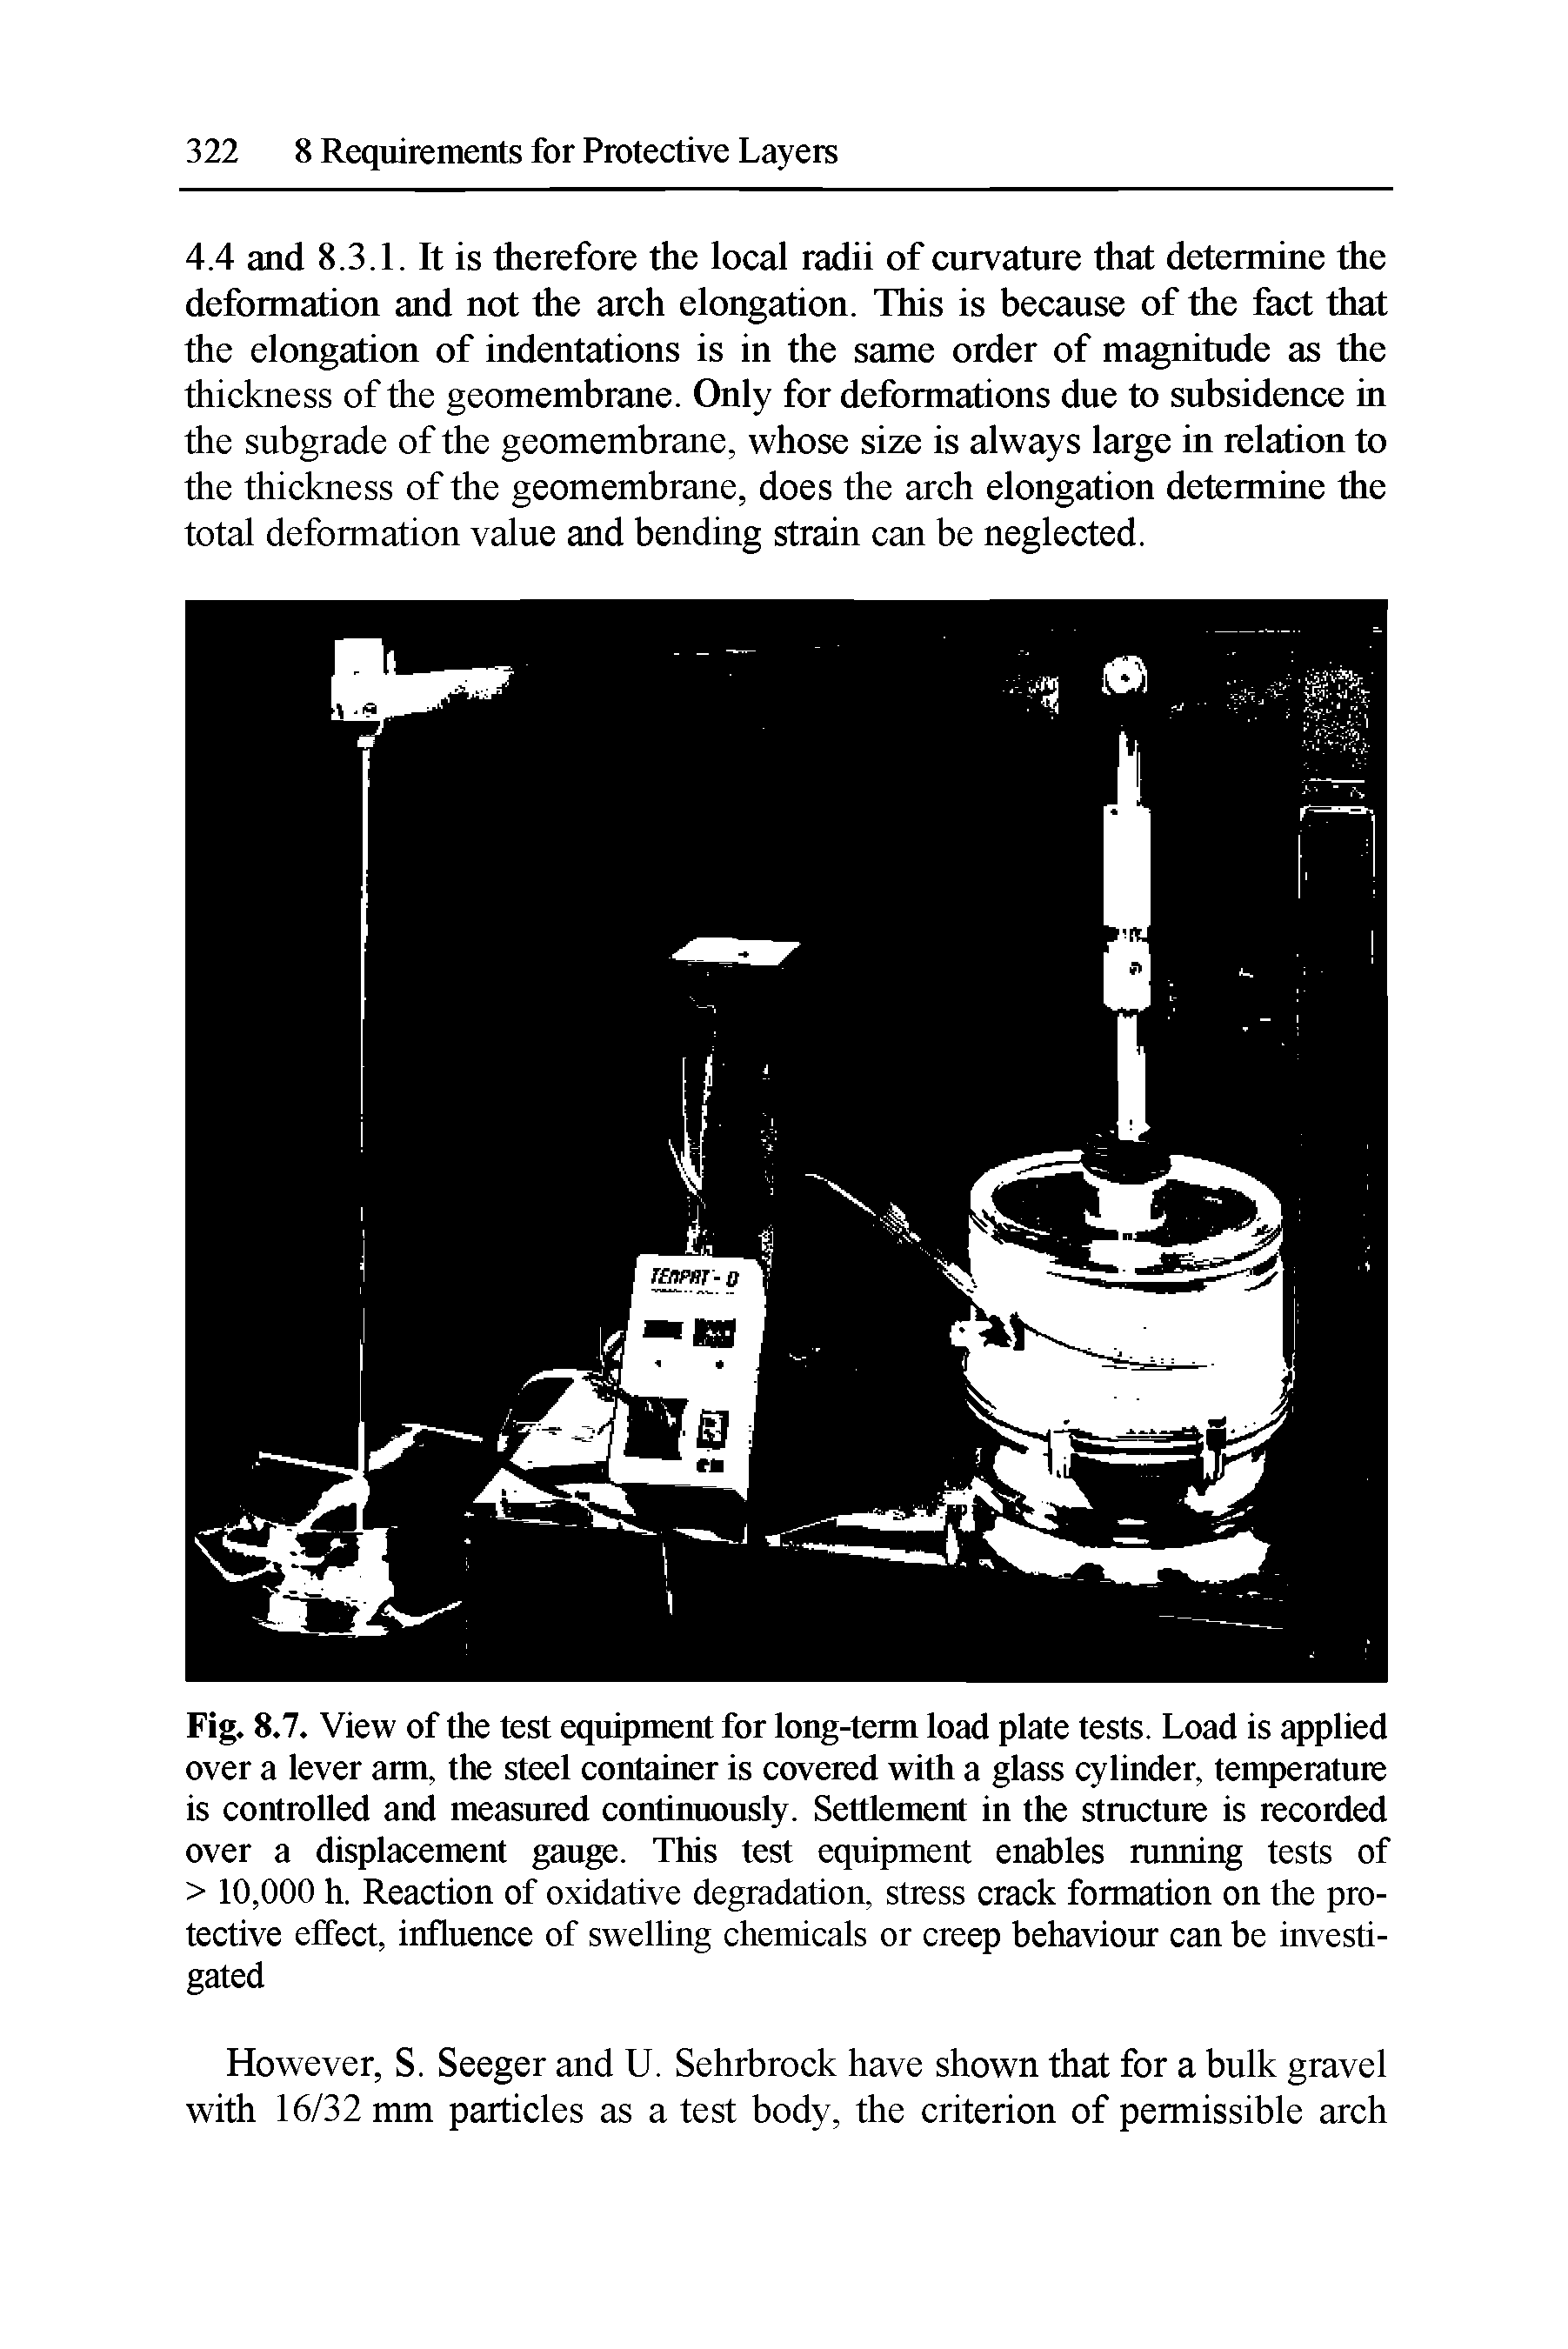 Fig. 8.7. View of the test equipment for long-term load plate tests. Load is applied over a lever arm, the steel container is covered with a glass cylinder, temperature is controlled and measured continuously. Settlement in the stmcture is recorded over a displacement gauge. This test equipment enables miming tests of > 10,000 h. Reaction of oxidative degradation, stress crack formation on the protective effect, influence of swelling chemicals or creep behaviour can be investigated...